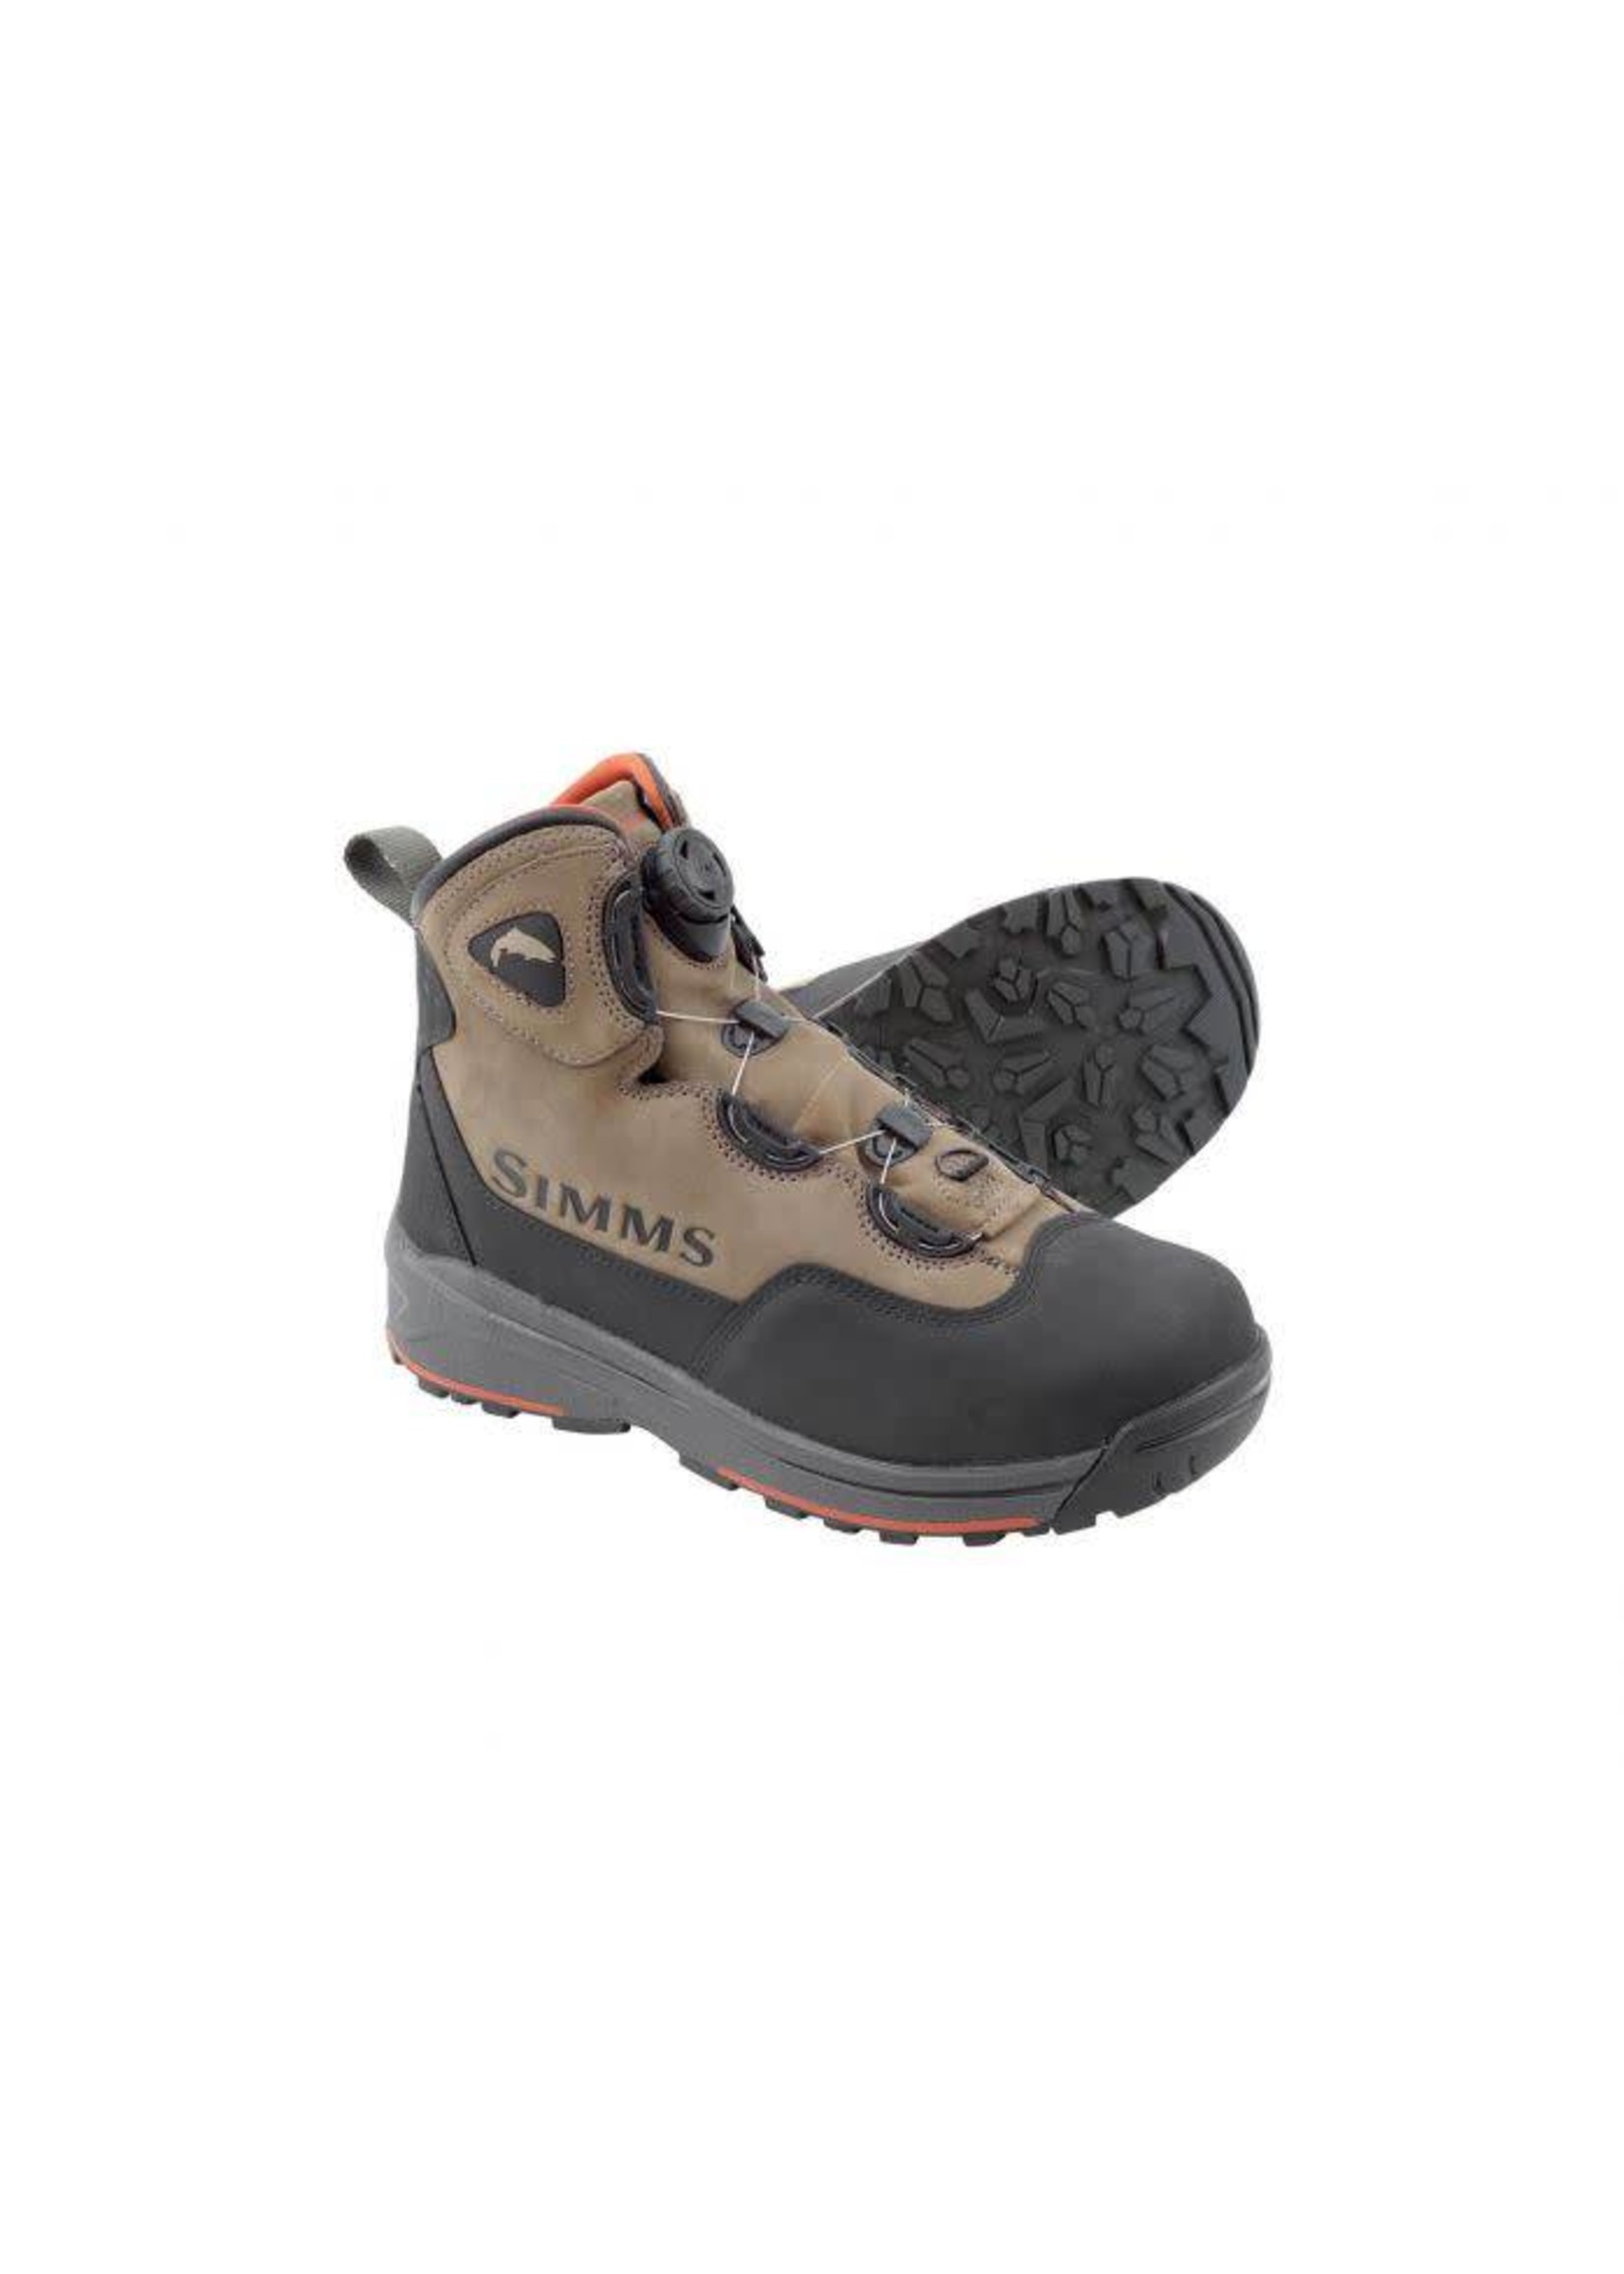 Simms Simms Men's Headwaters Boa Wading Boot - Vibram Sole